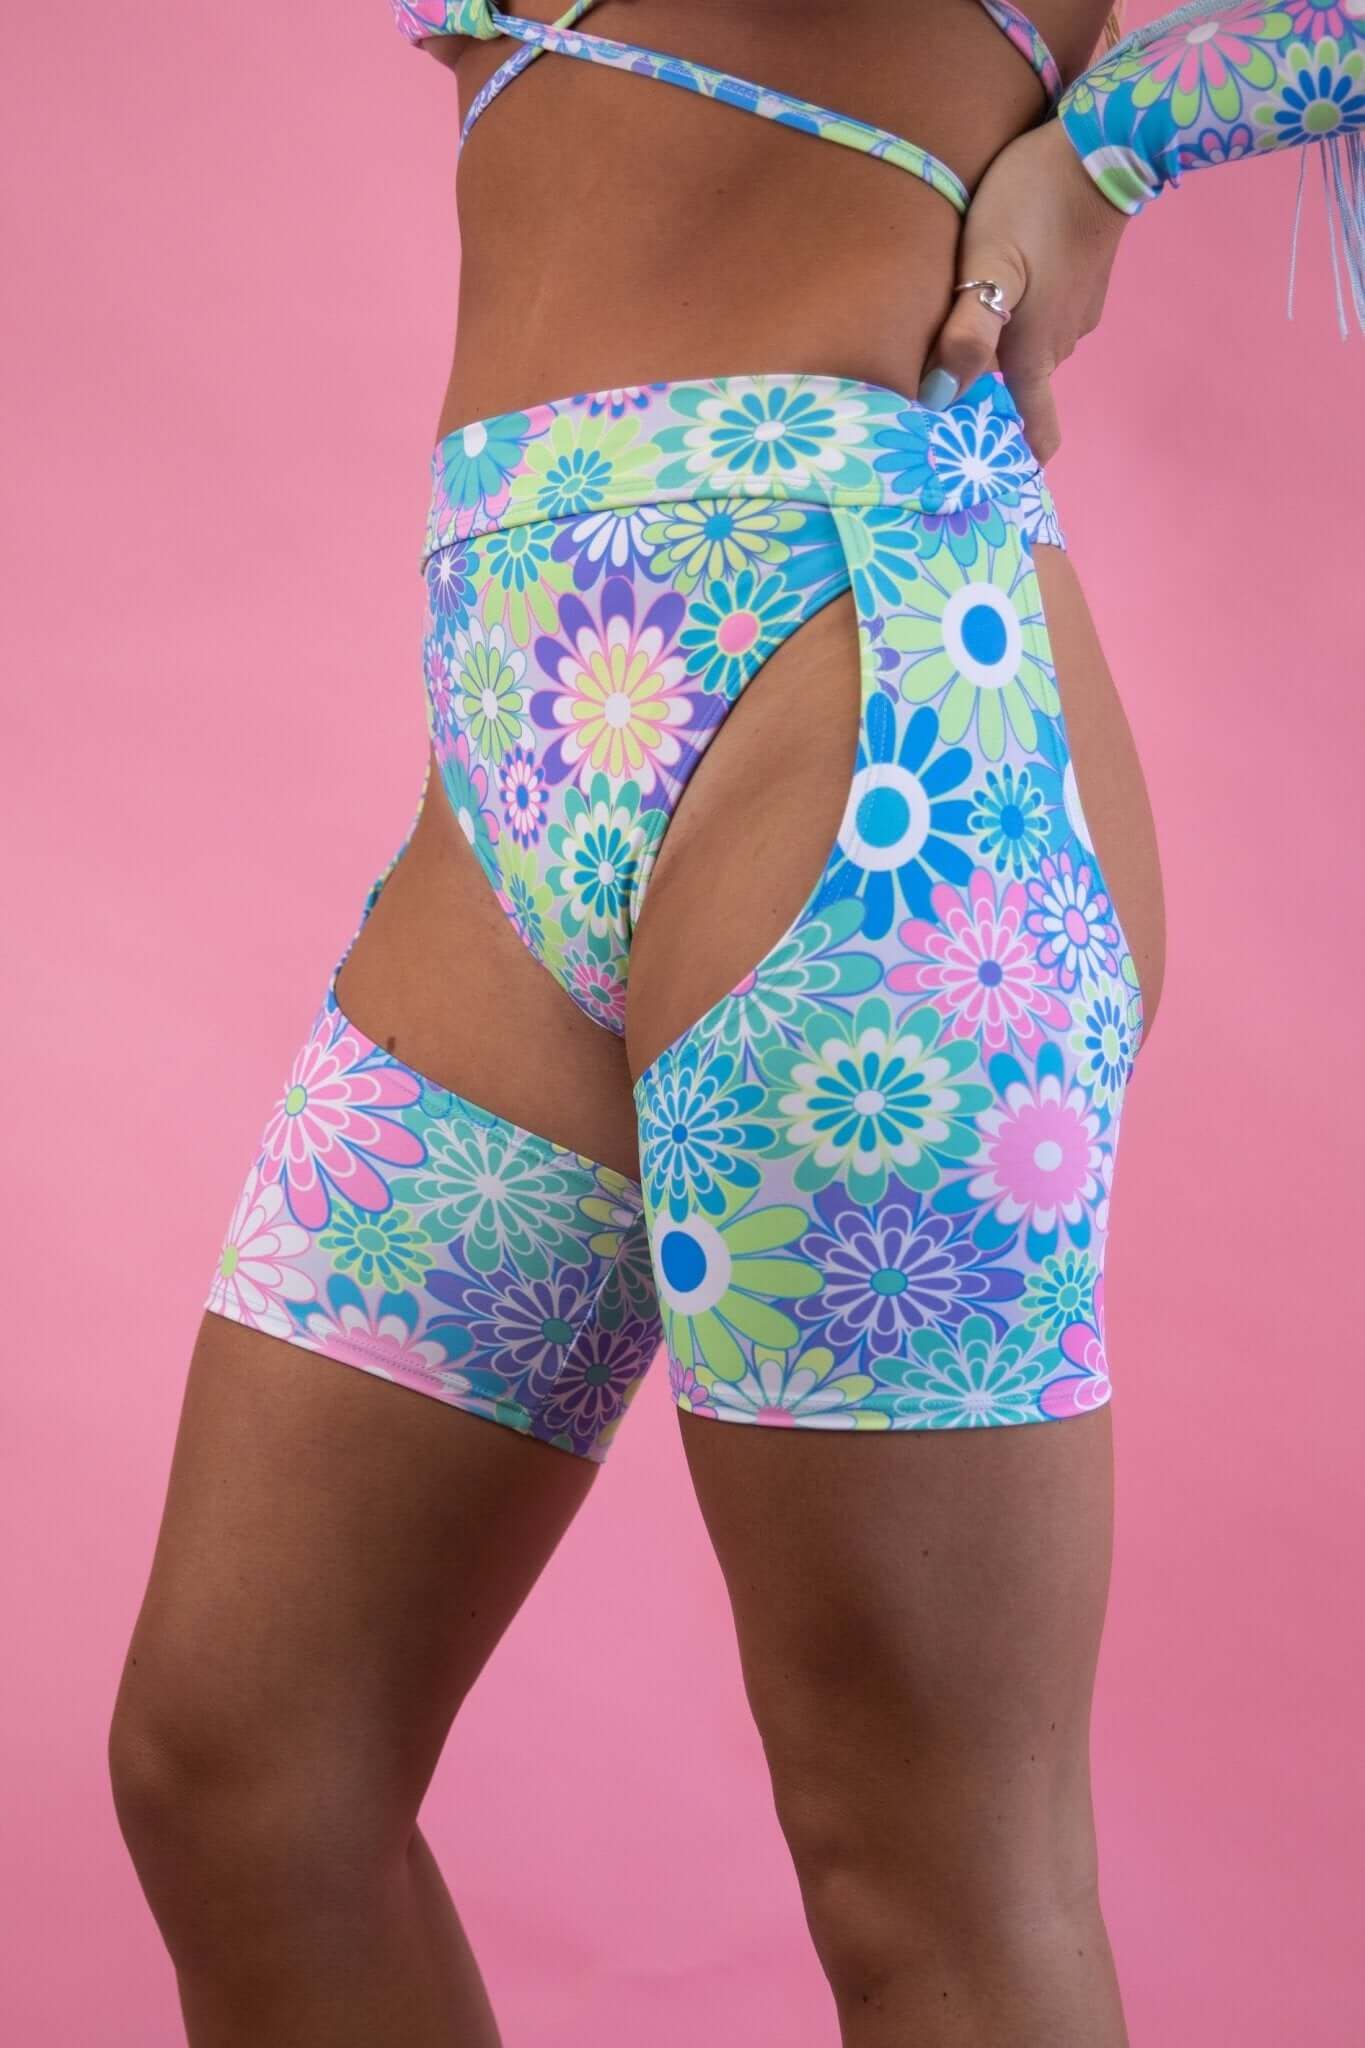 Retro Bloom Chaps - Freedom Rave Wear - Chaps